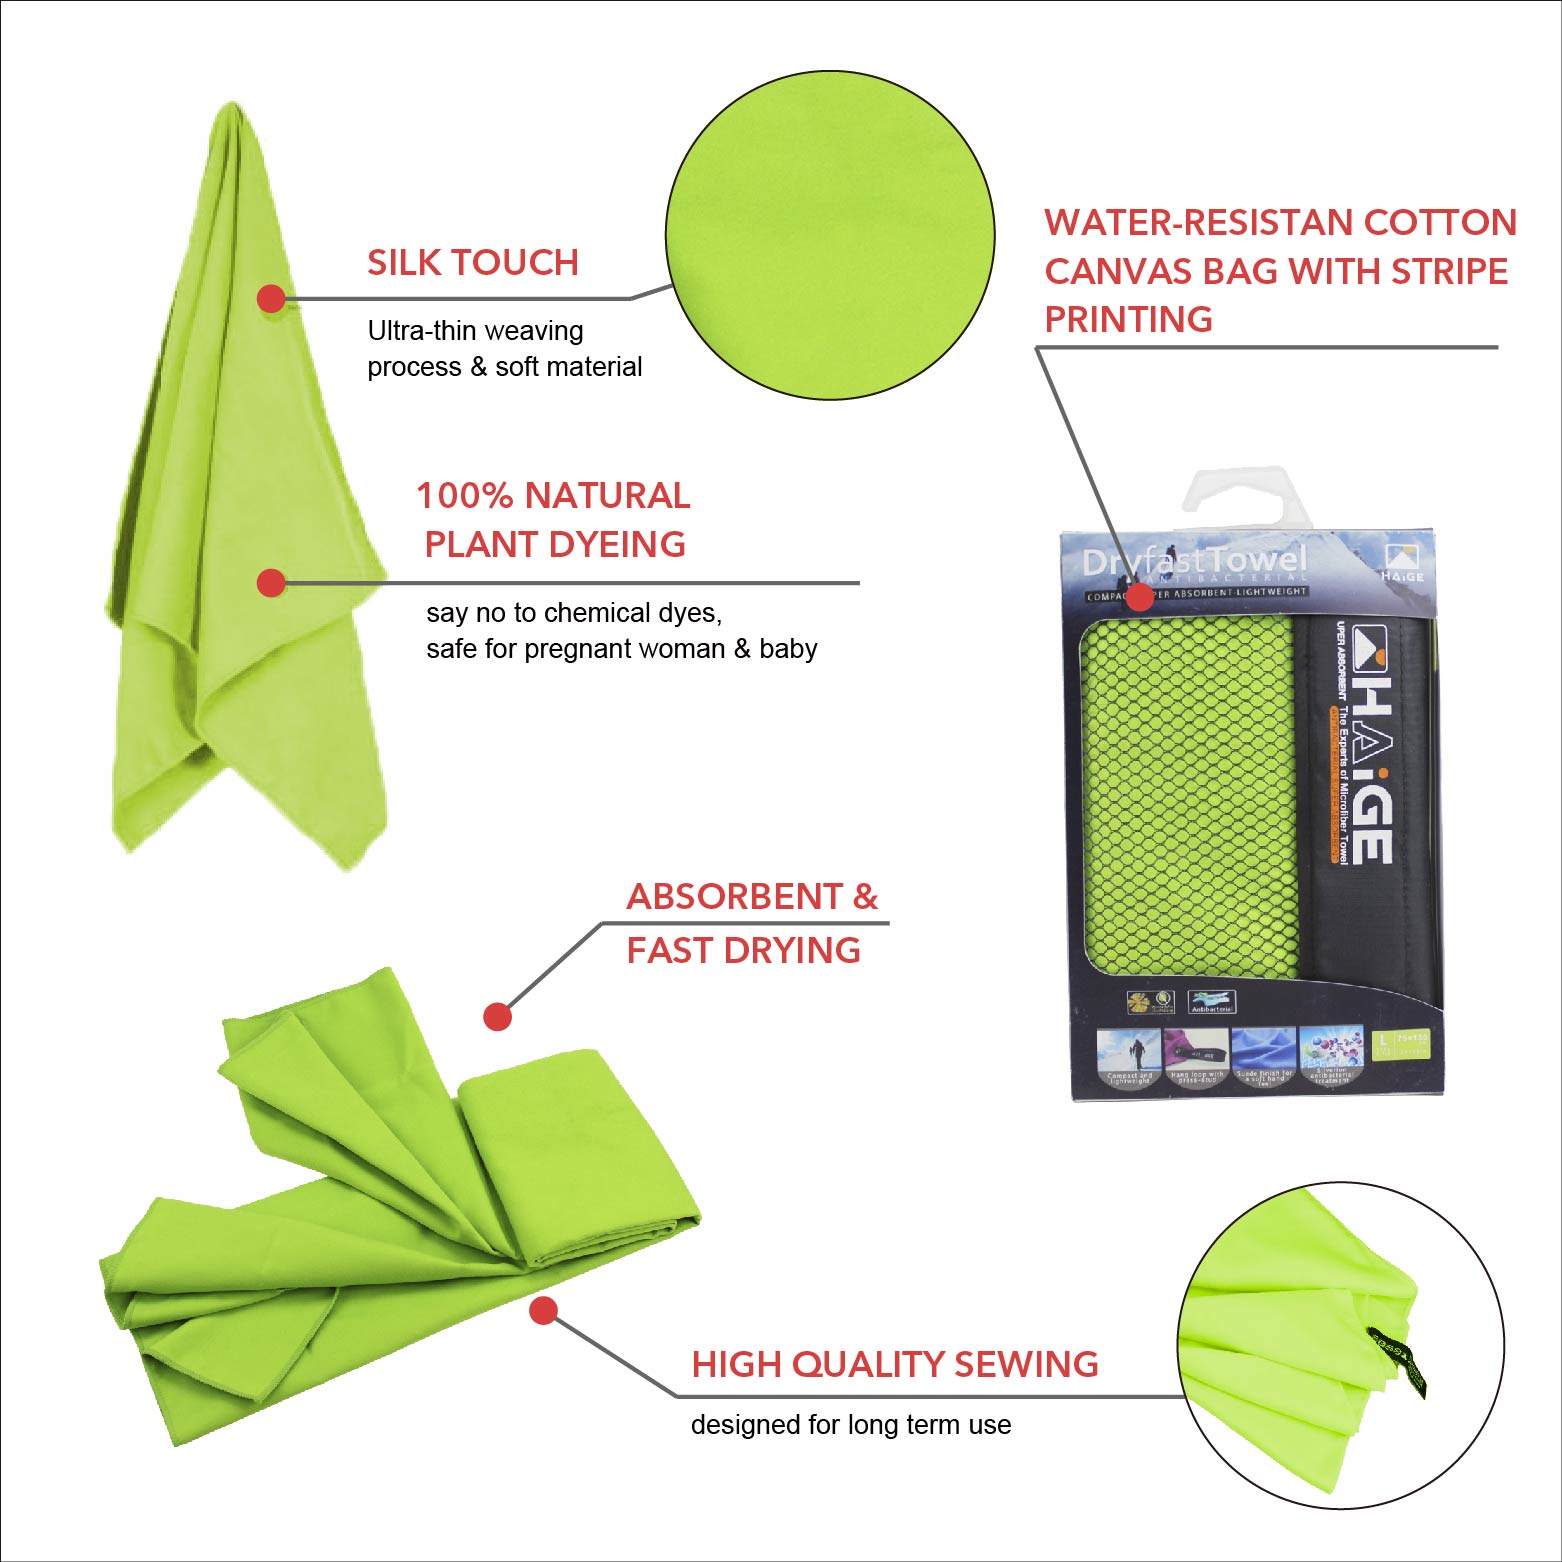 Microfiber Suede sports Towel With PP Case